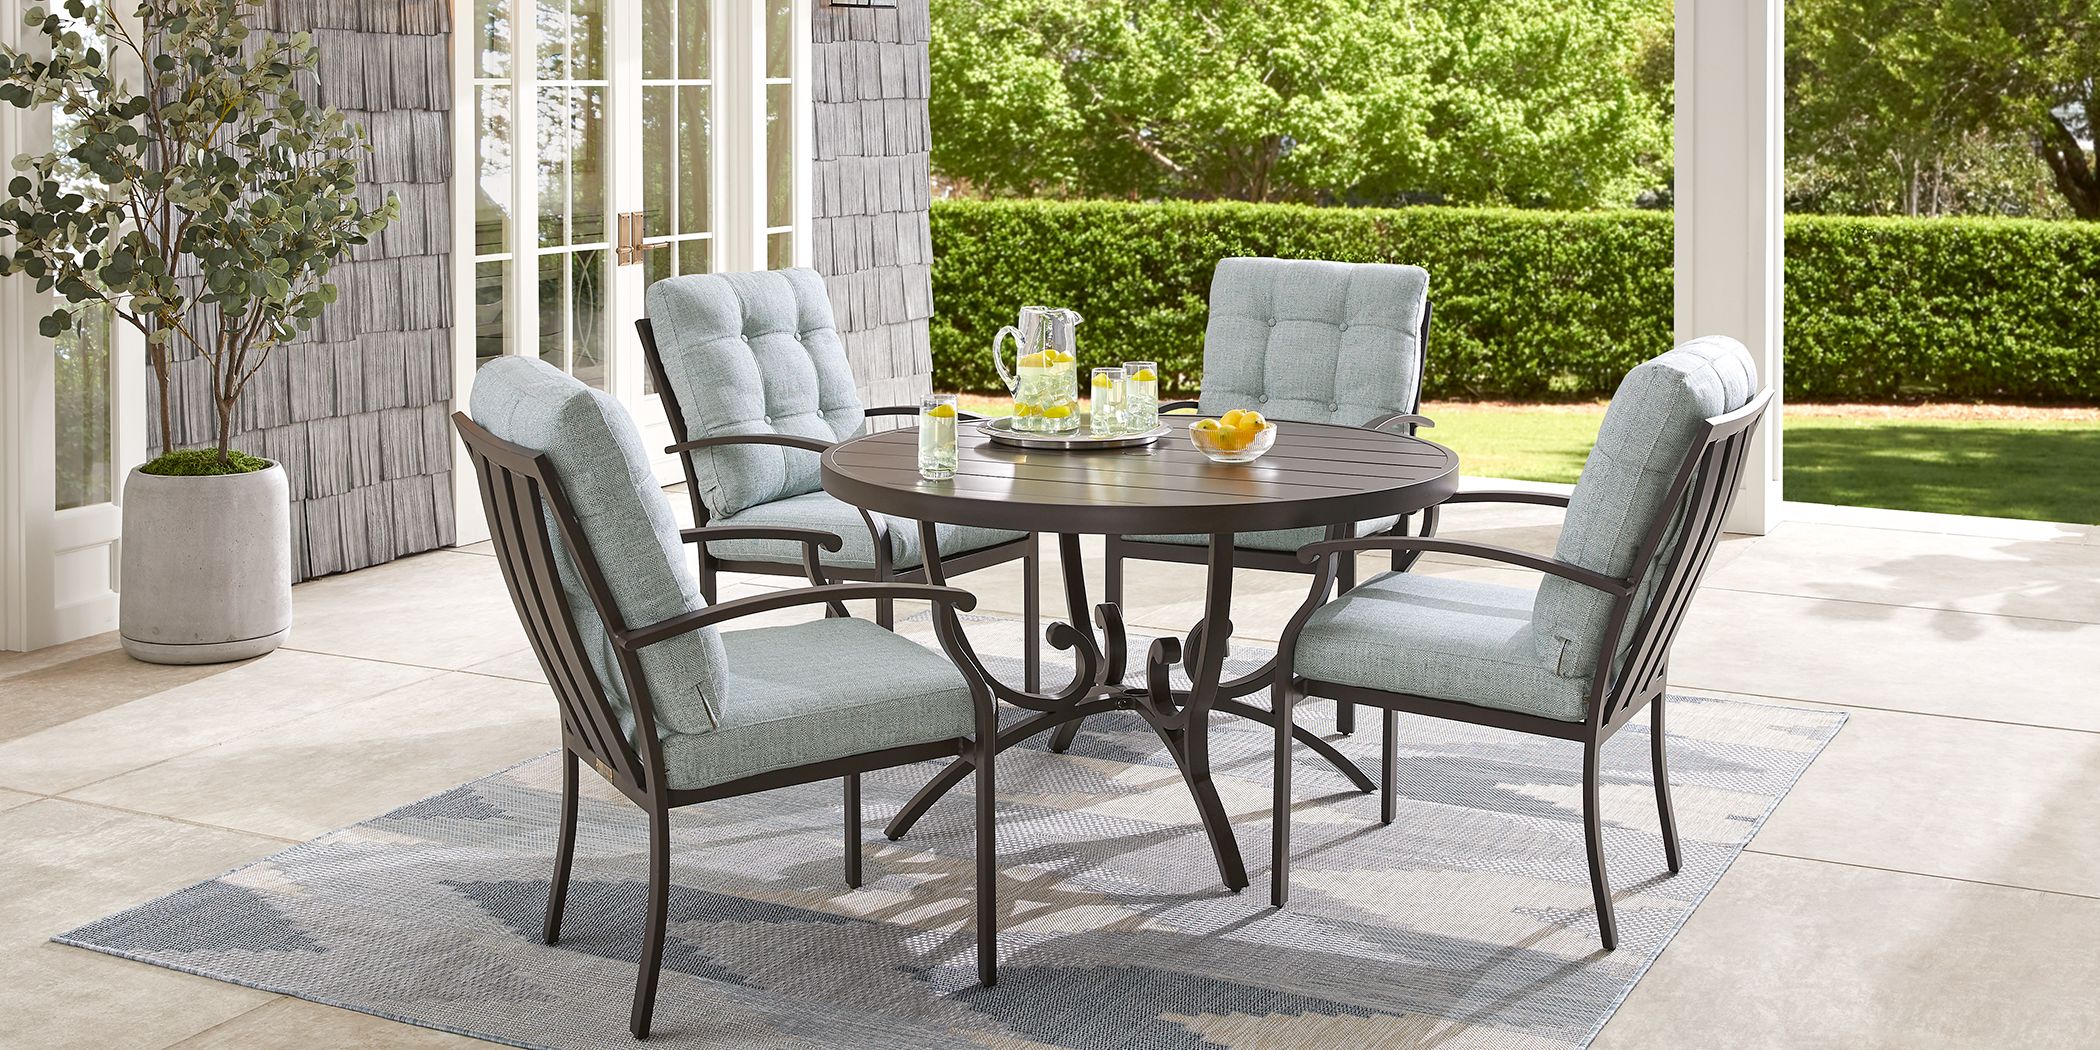 Outdoor 5 Piece Patio Dining Sets, Best Patio Dining Sets Under 1000